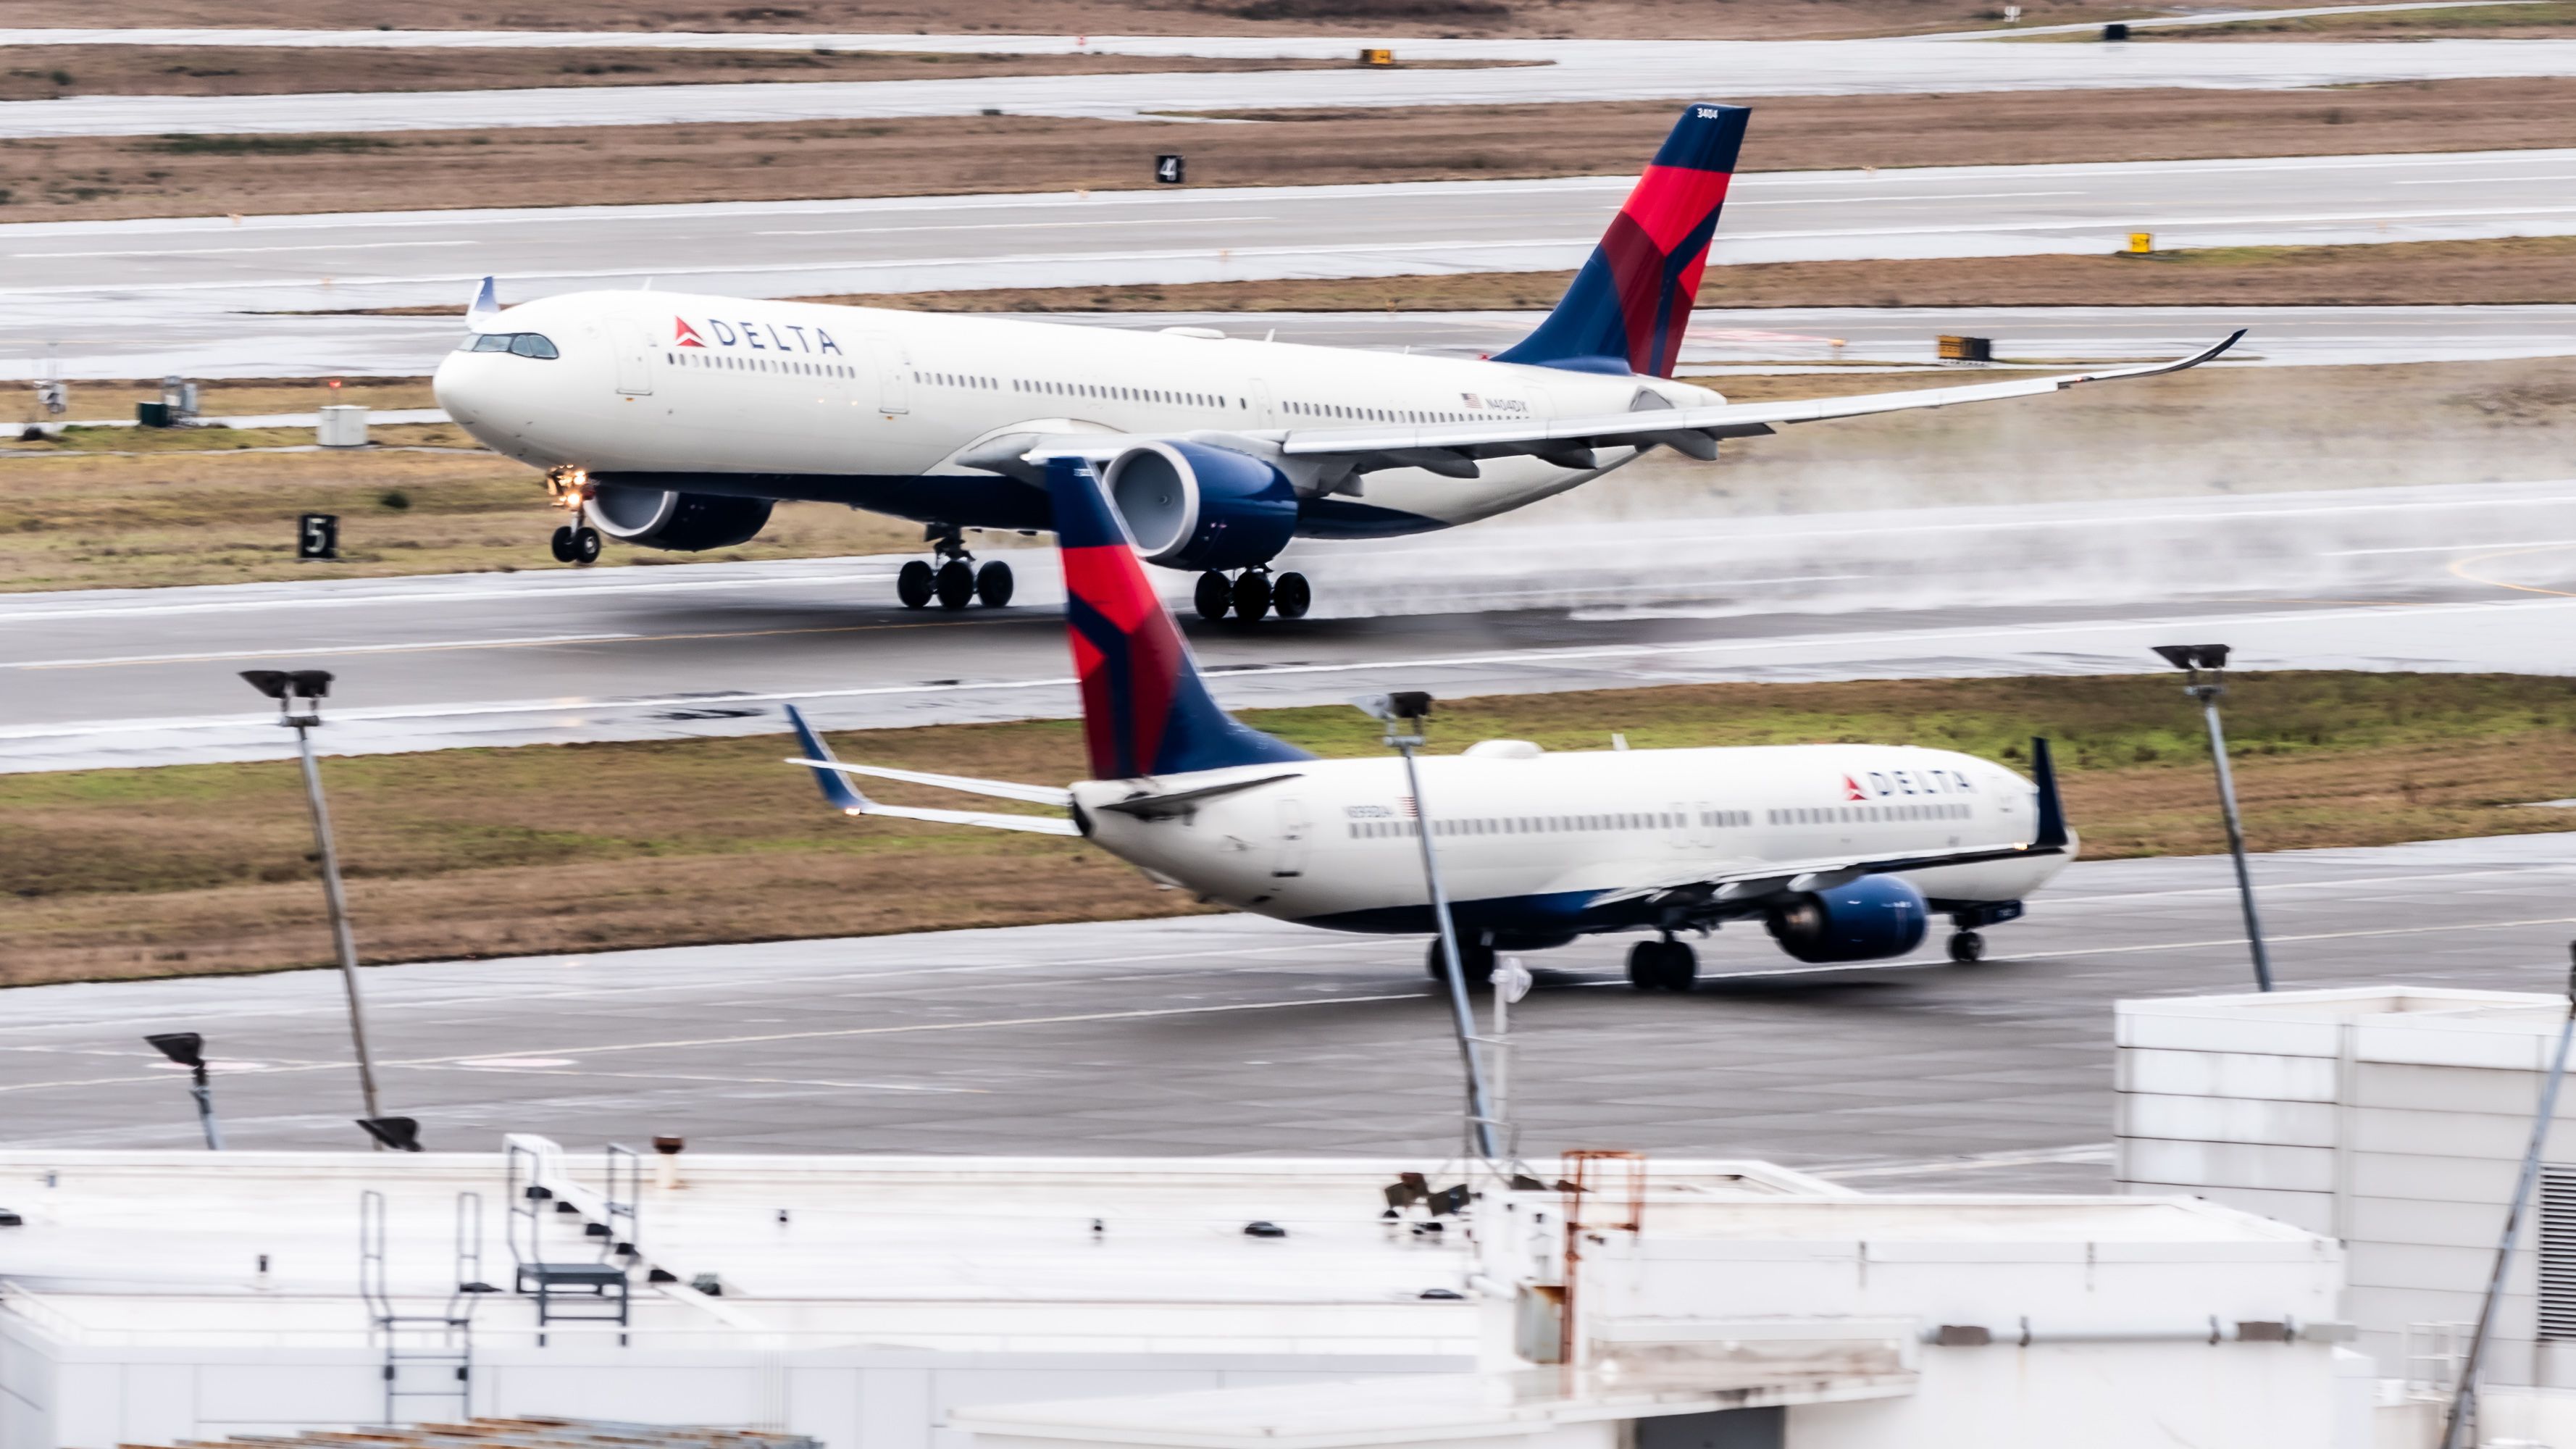 An Delta Air Lines Airbus A330-900neo Lifting Off From SEA while a Delta Air Lines Boeing 737 waits on the apron.